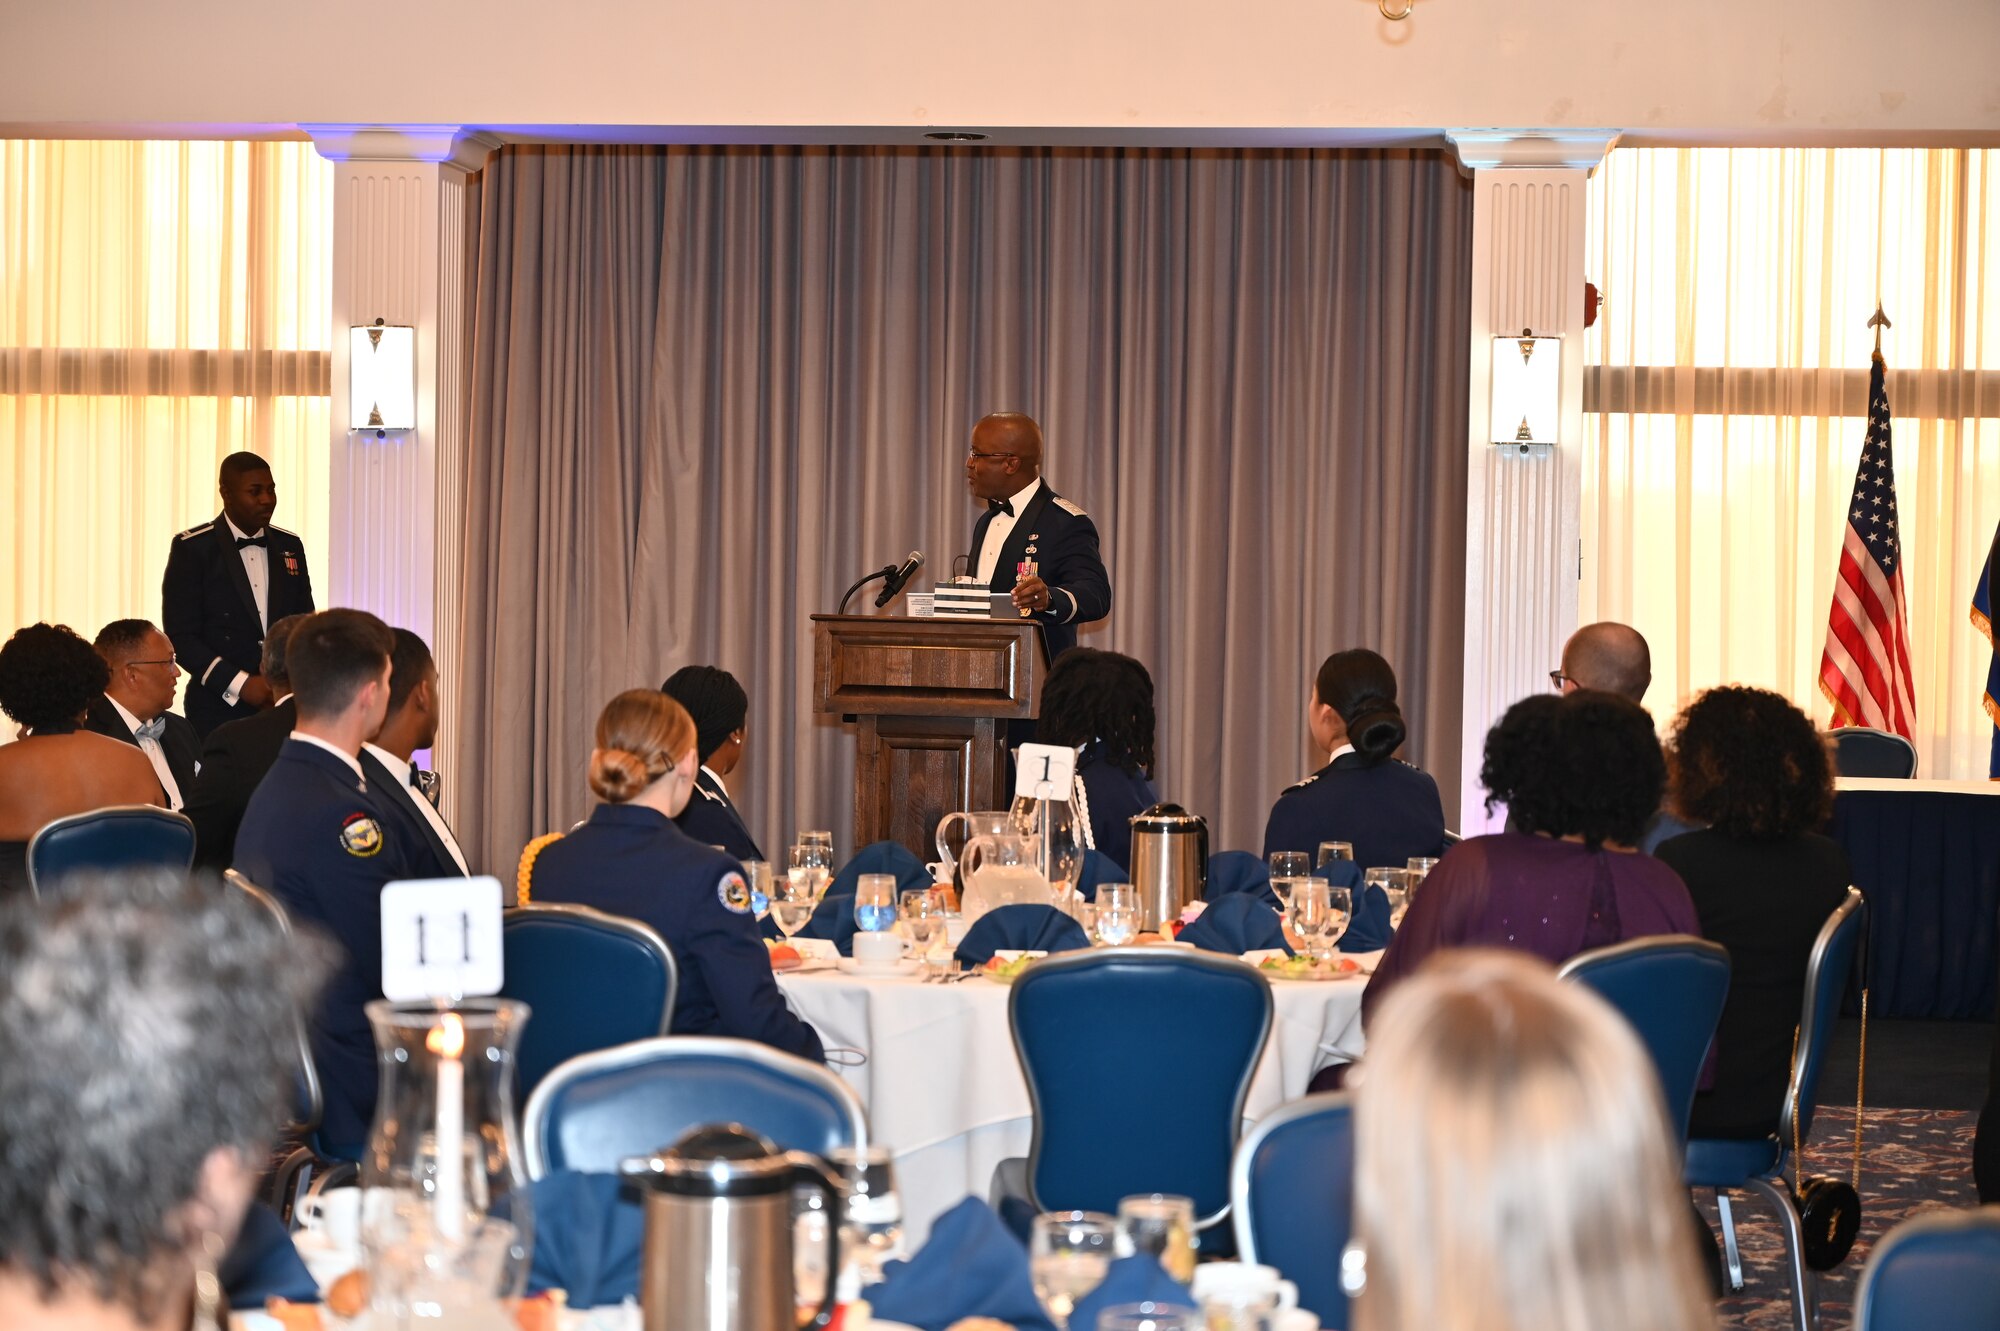 Lt. Gen. Stacy Hawkins, Air Force Sustainment Center Commander, gives the keynote speech at the 34th Annual Air Force Cadet Officer Mentor Association’s (AFCOMA) Anniversary Awards Gala to a room filled with ROTC cadets, AFCOMA members and alum, and their families on May 6, 2023, at Joint Base Anacostia-Bolling.